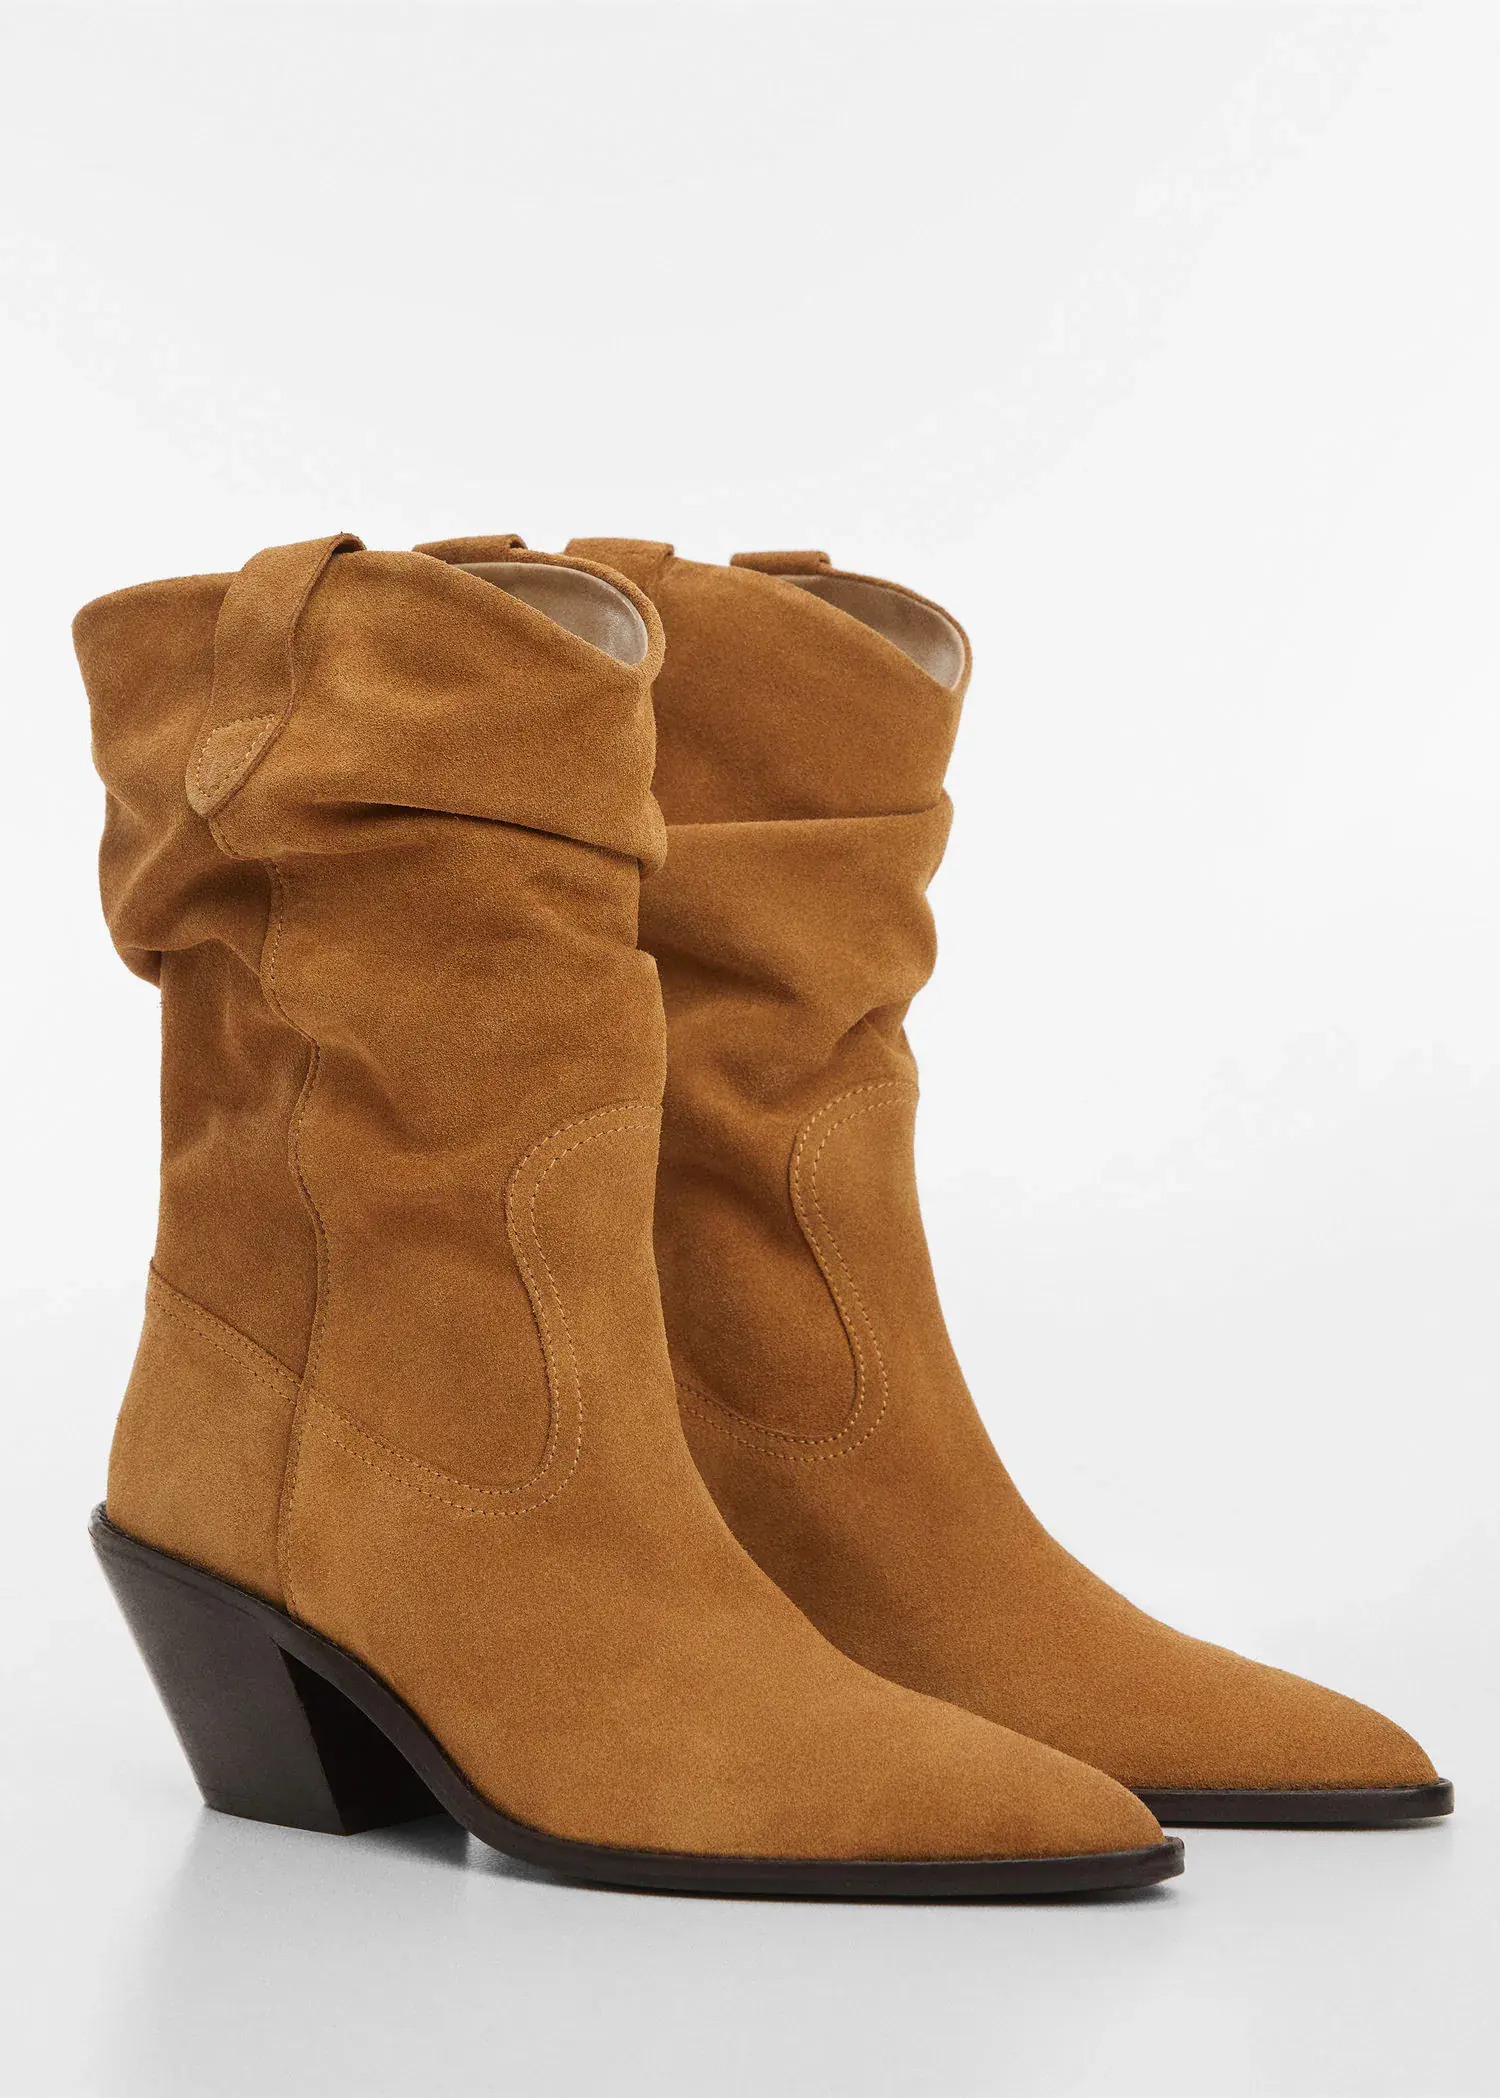 Mango Suede leather ankle boots. 2